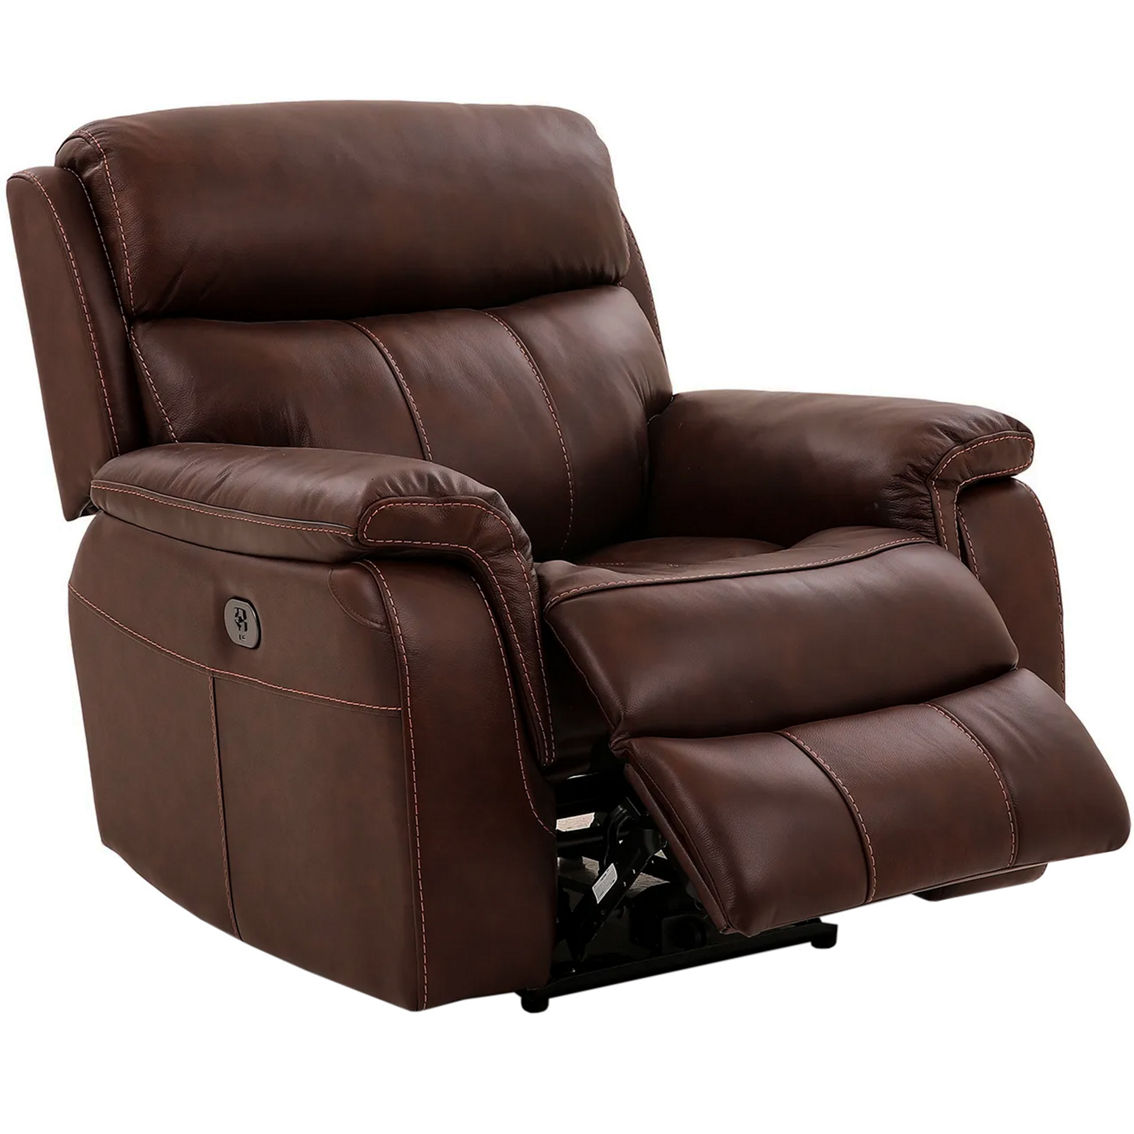 Armen Living Montague Dual Power Headrest and Lumbar Support Leather Recliner - Image 3 of 9